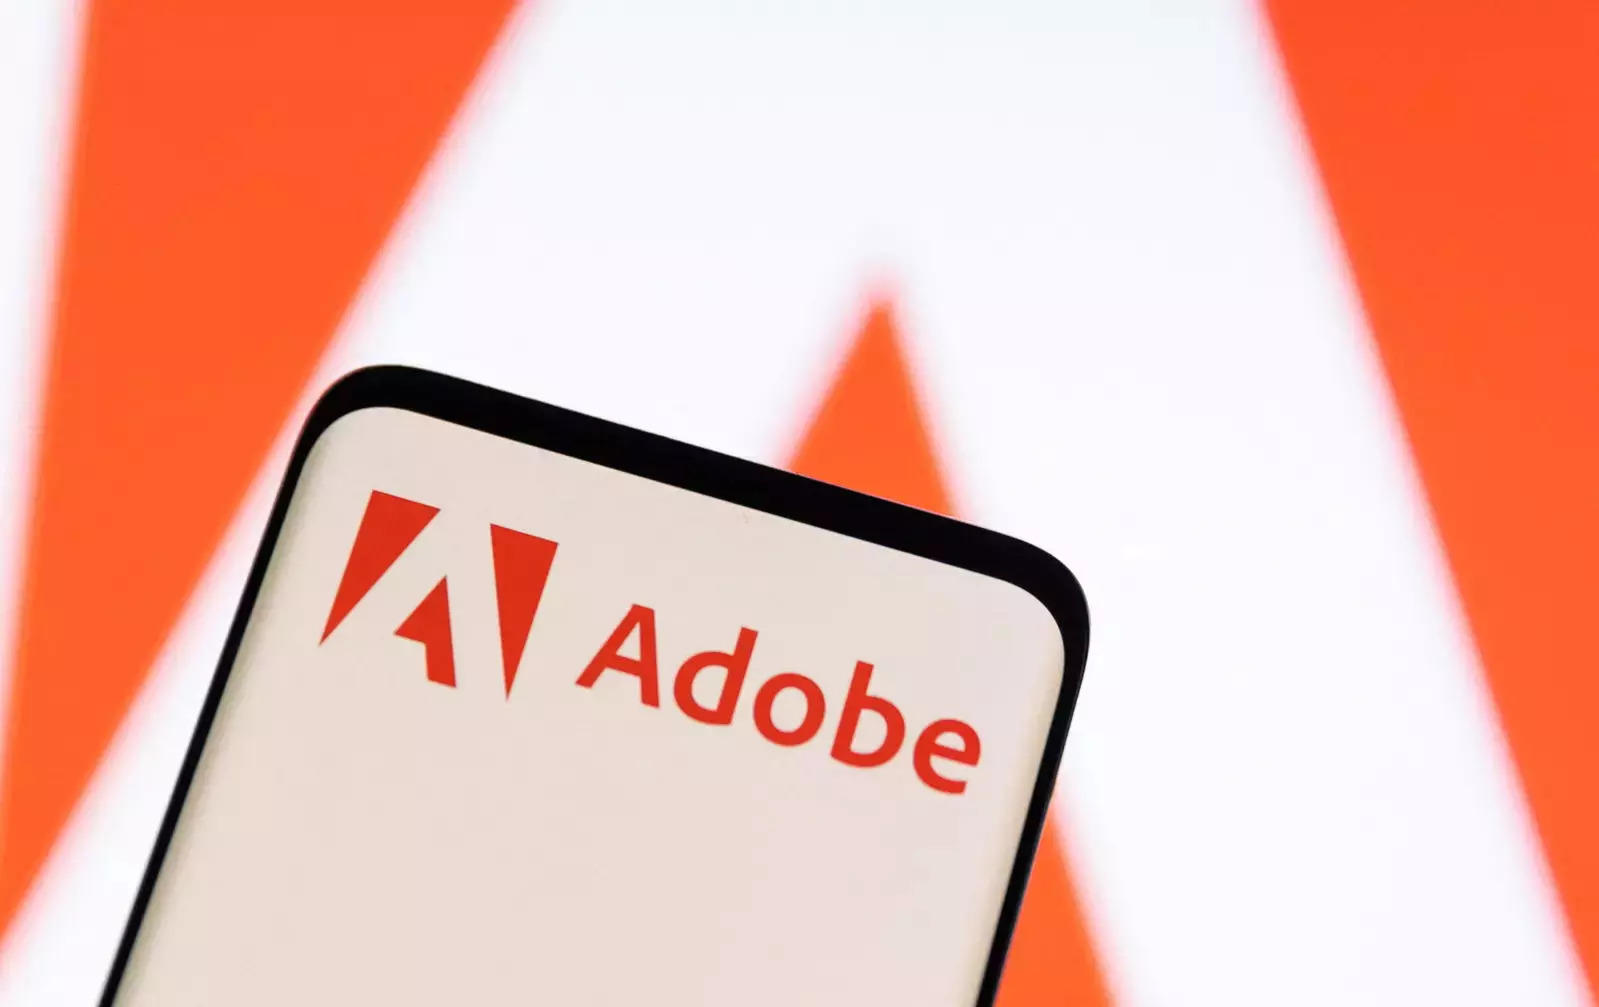 Pantone Colors in Adobe products are no longer free